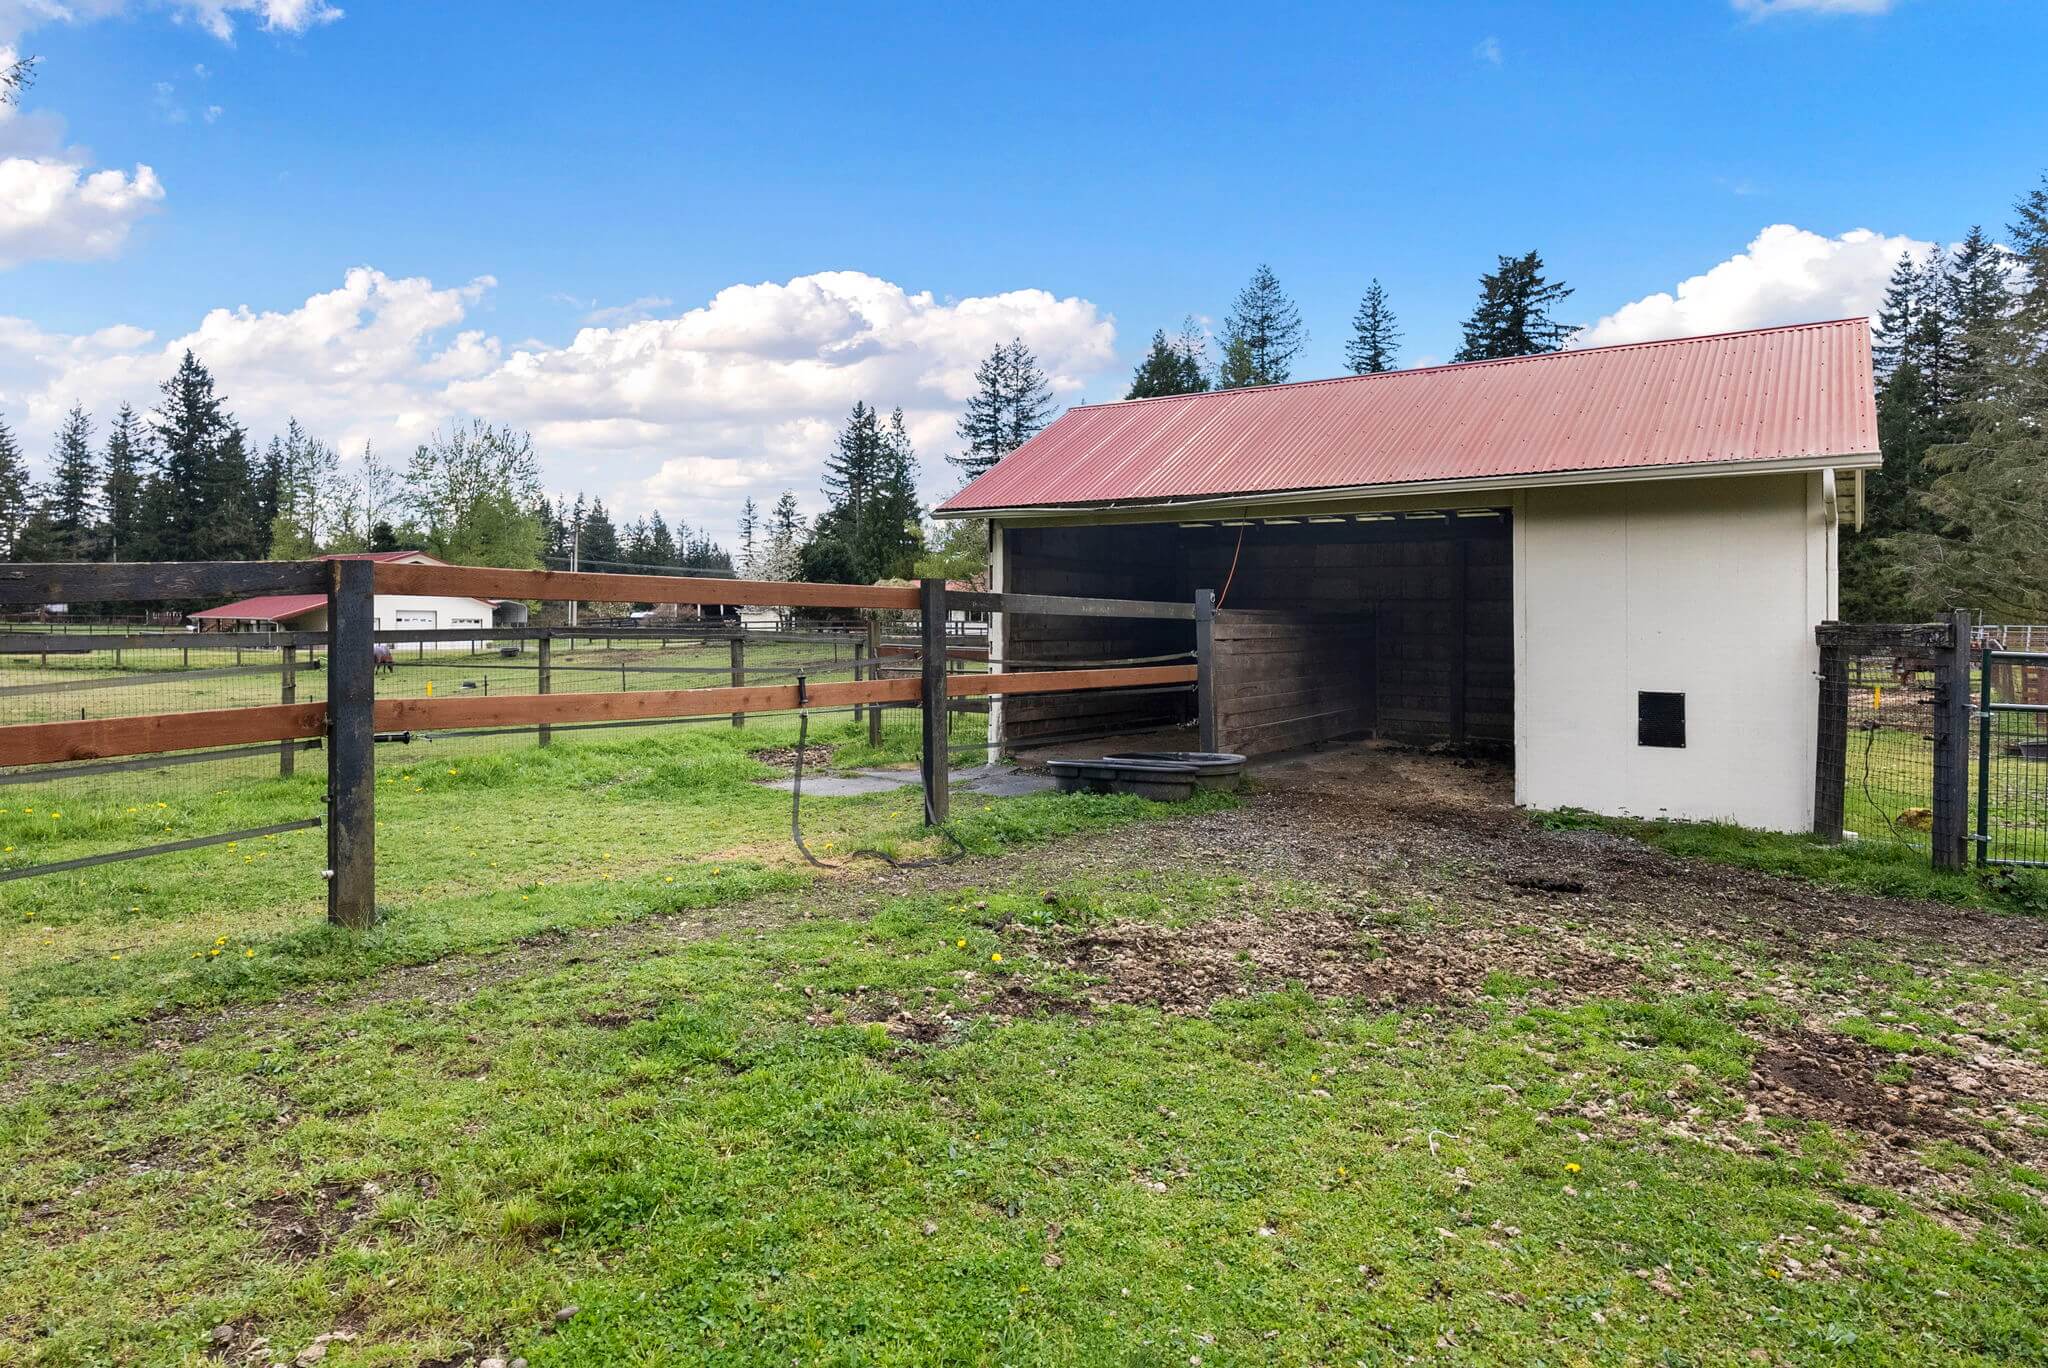 Second smaller barn with feed/tack room and two run-in stalls